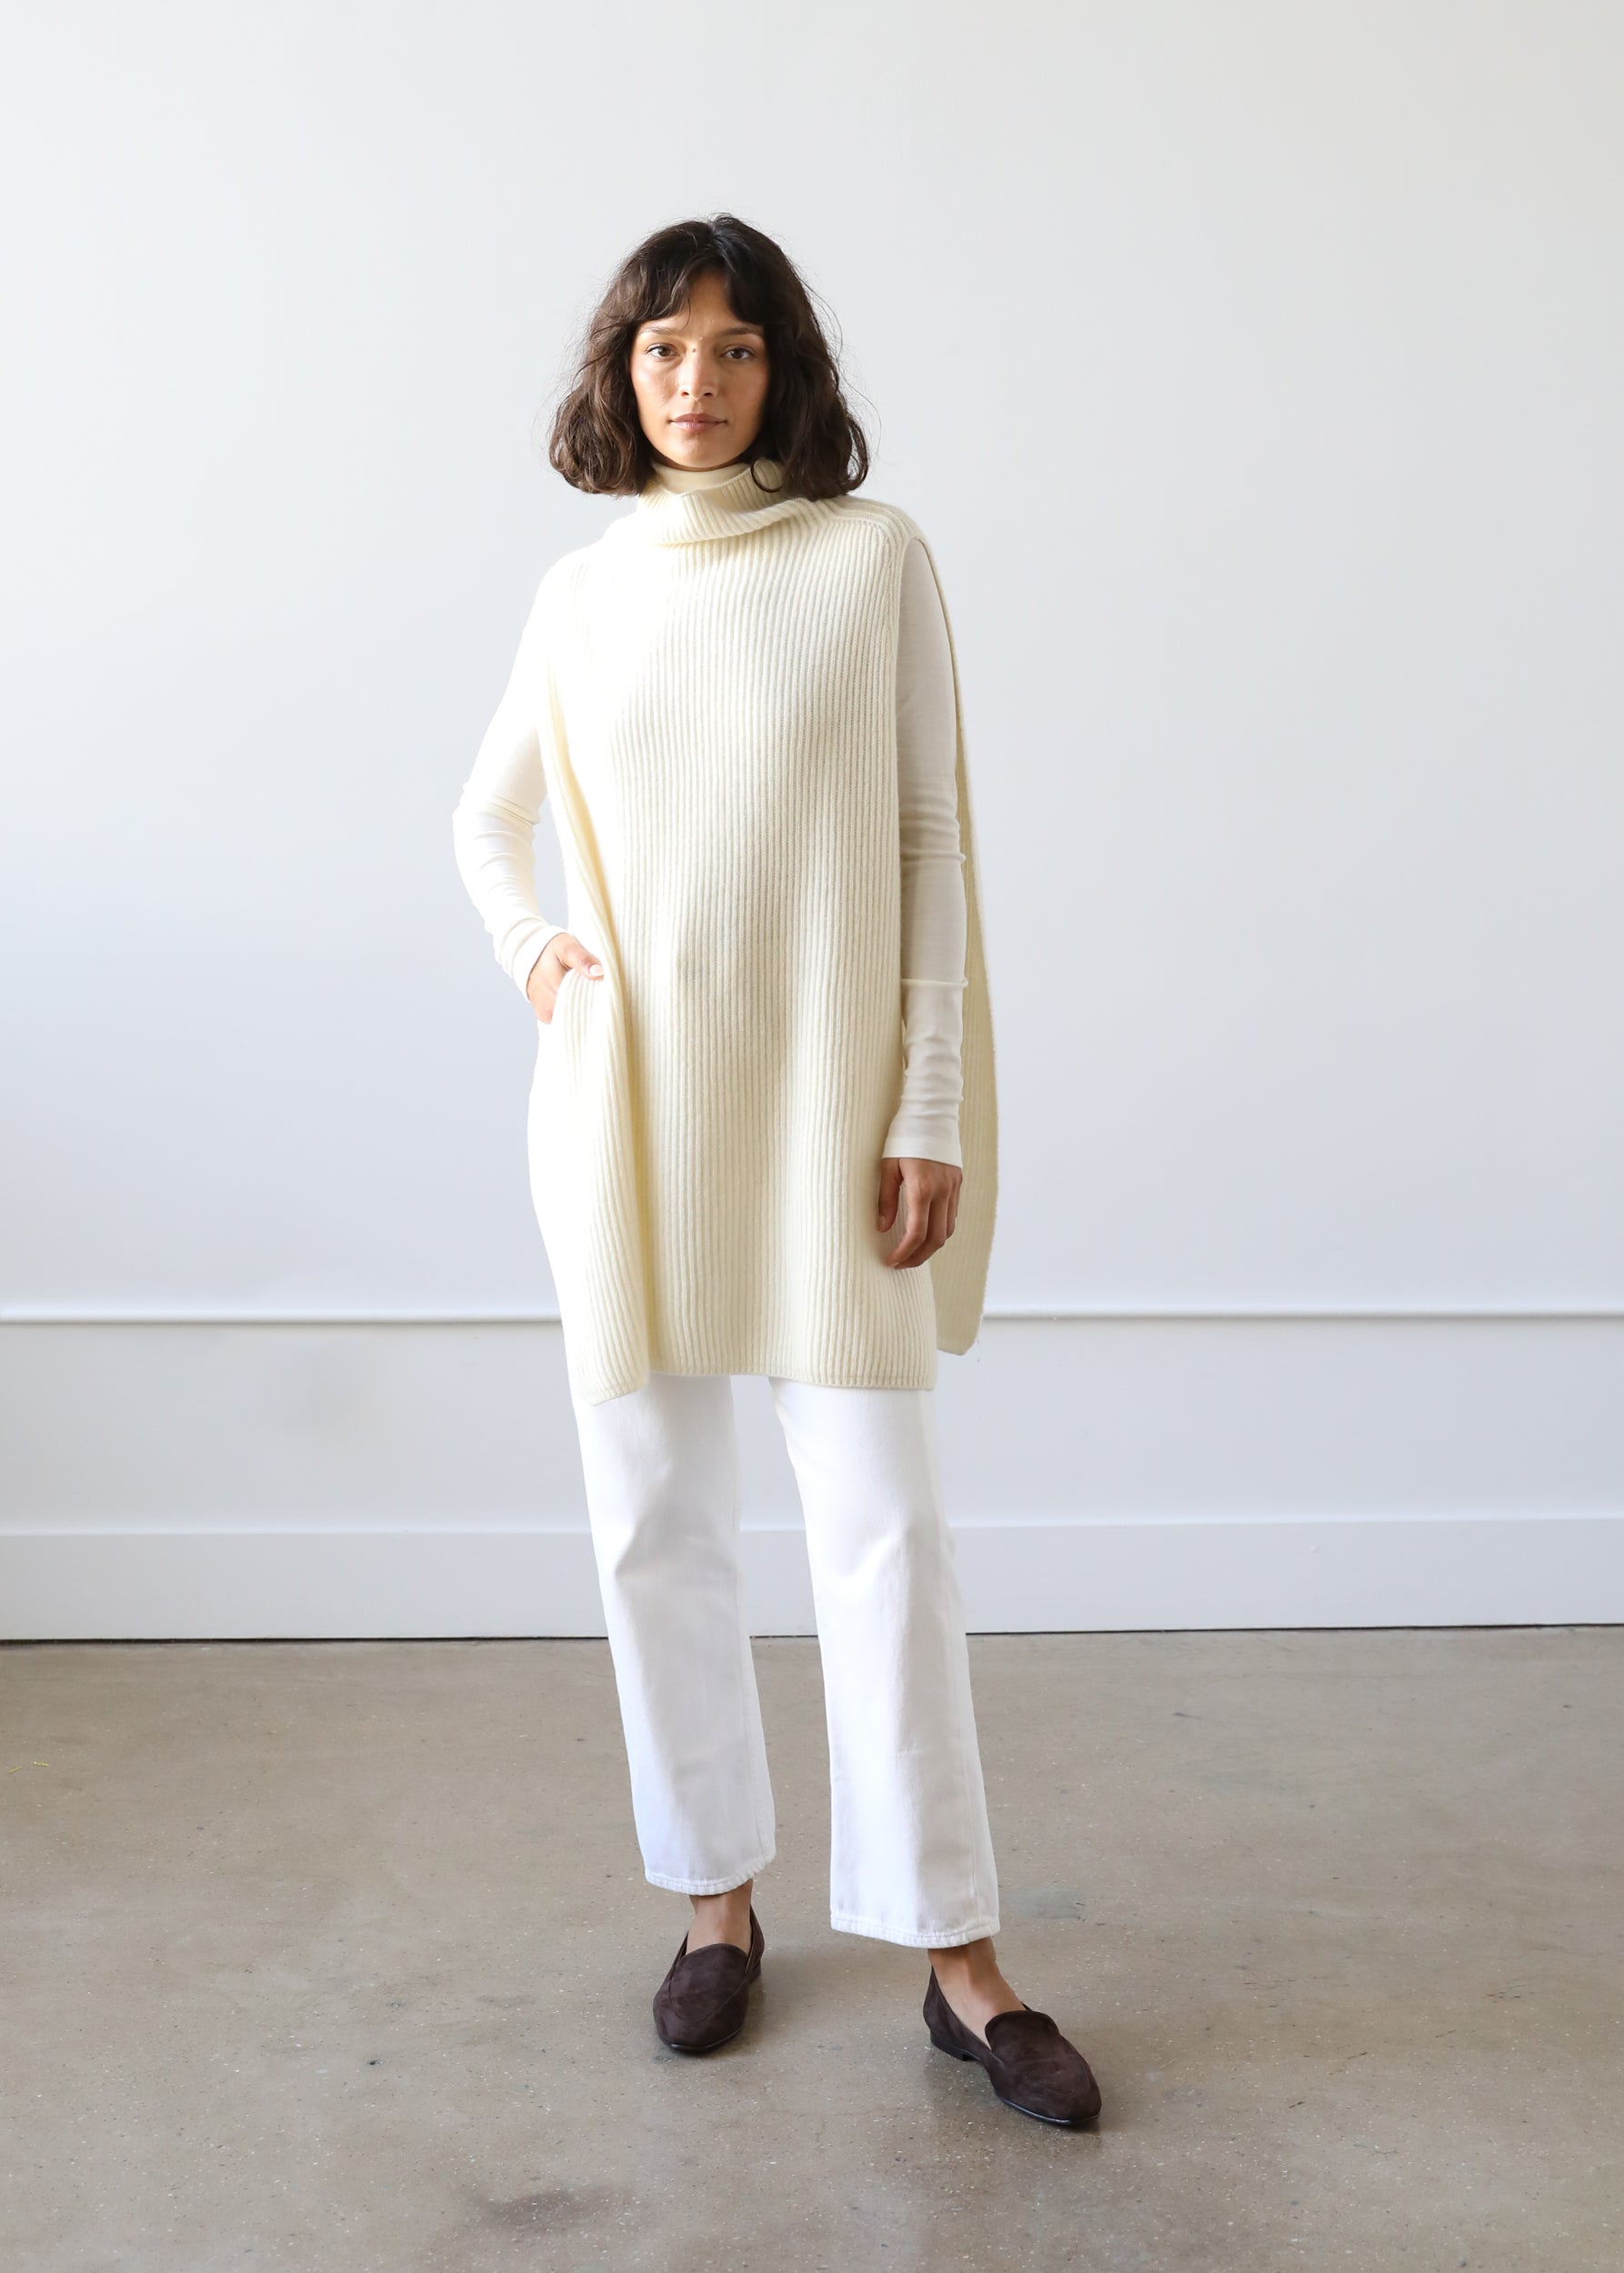 Estella NYC Gia Dickey Sweater in Ivory Cashmere